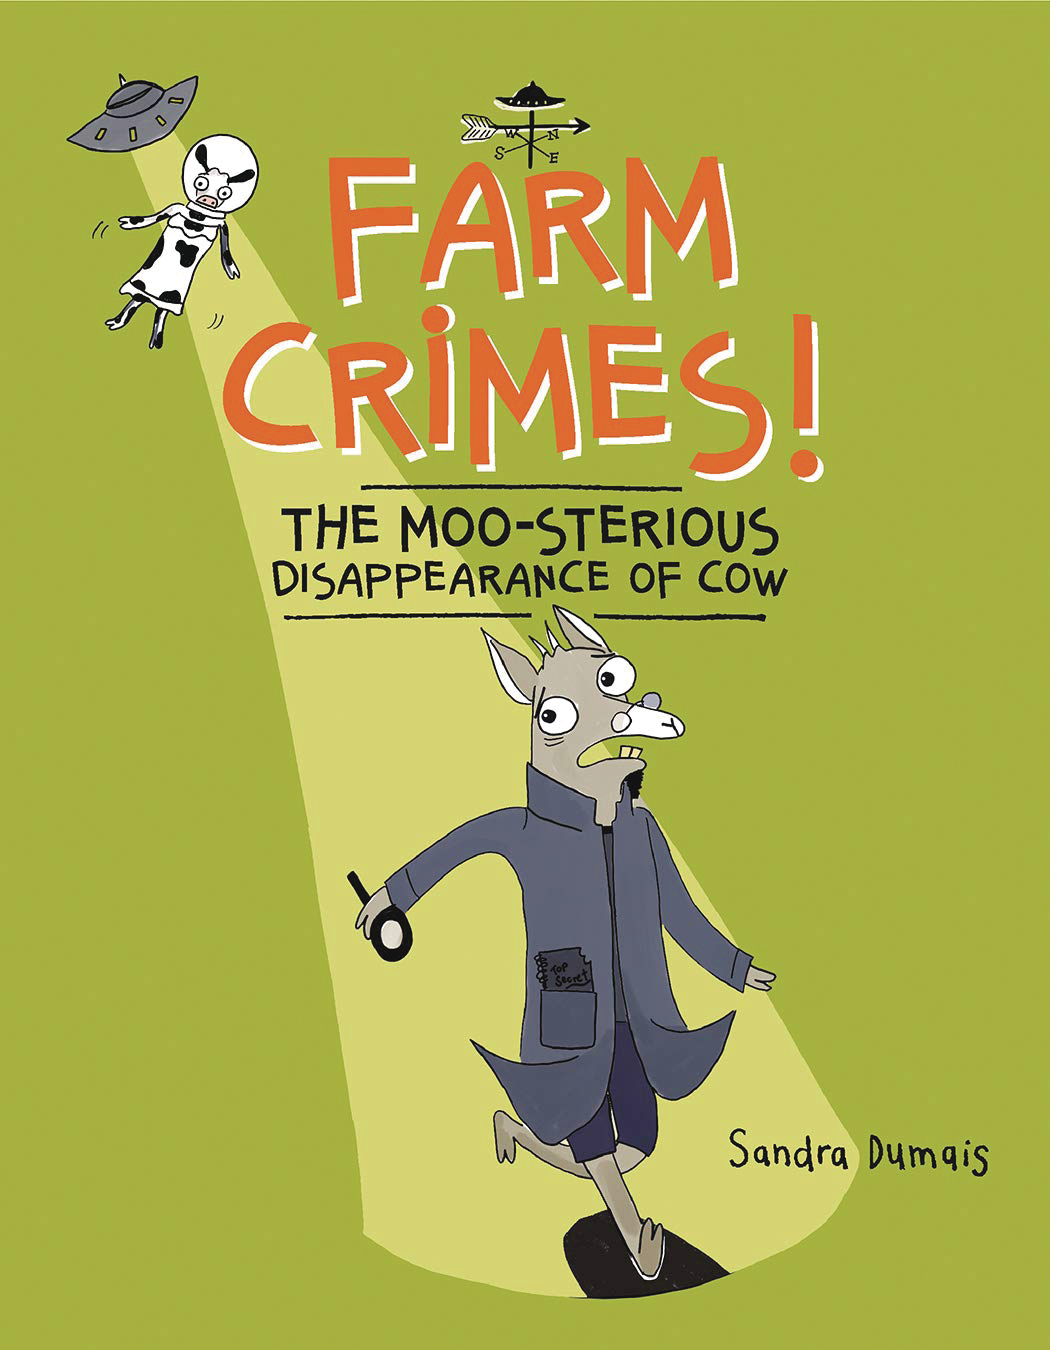 Farm Crimes Moo-Sterious Disappearance of Cow Graphic Novel